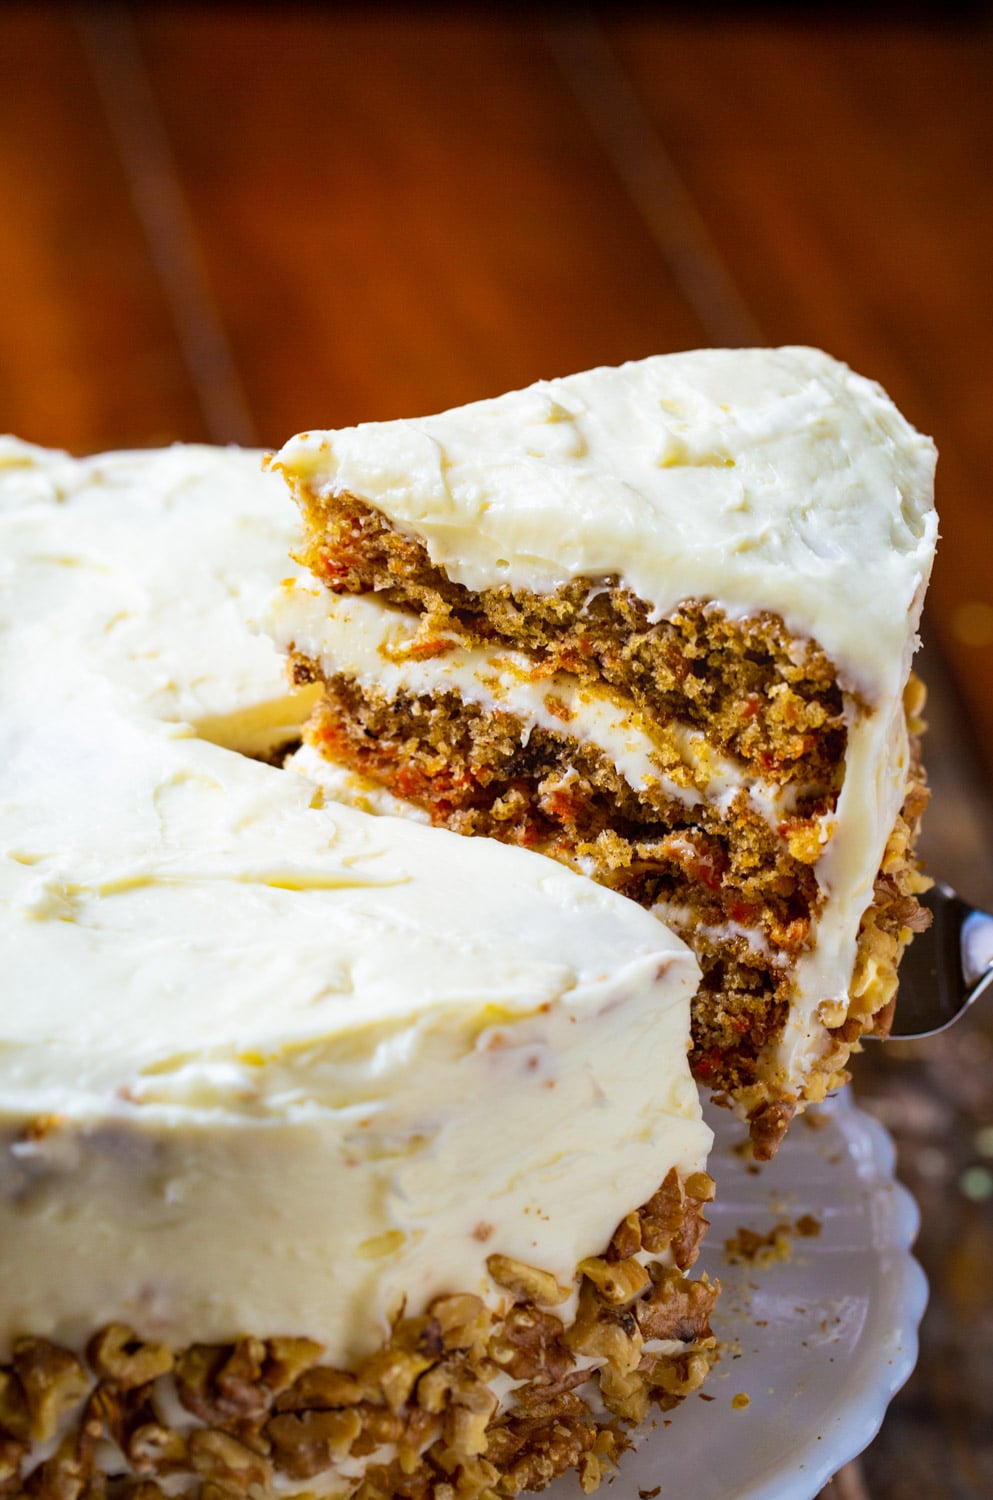 Slice of Carrot Cake being removed from rest of cake.